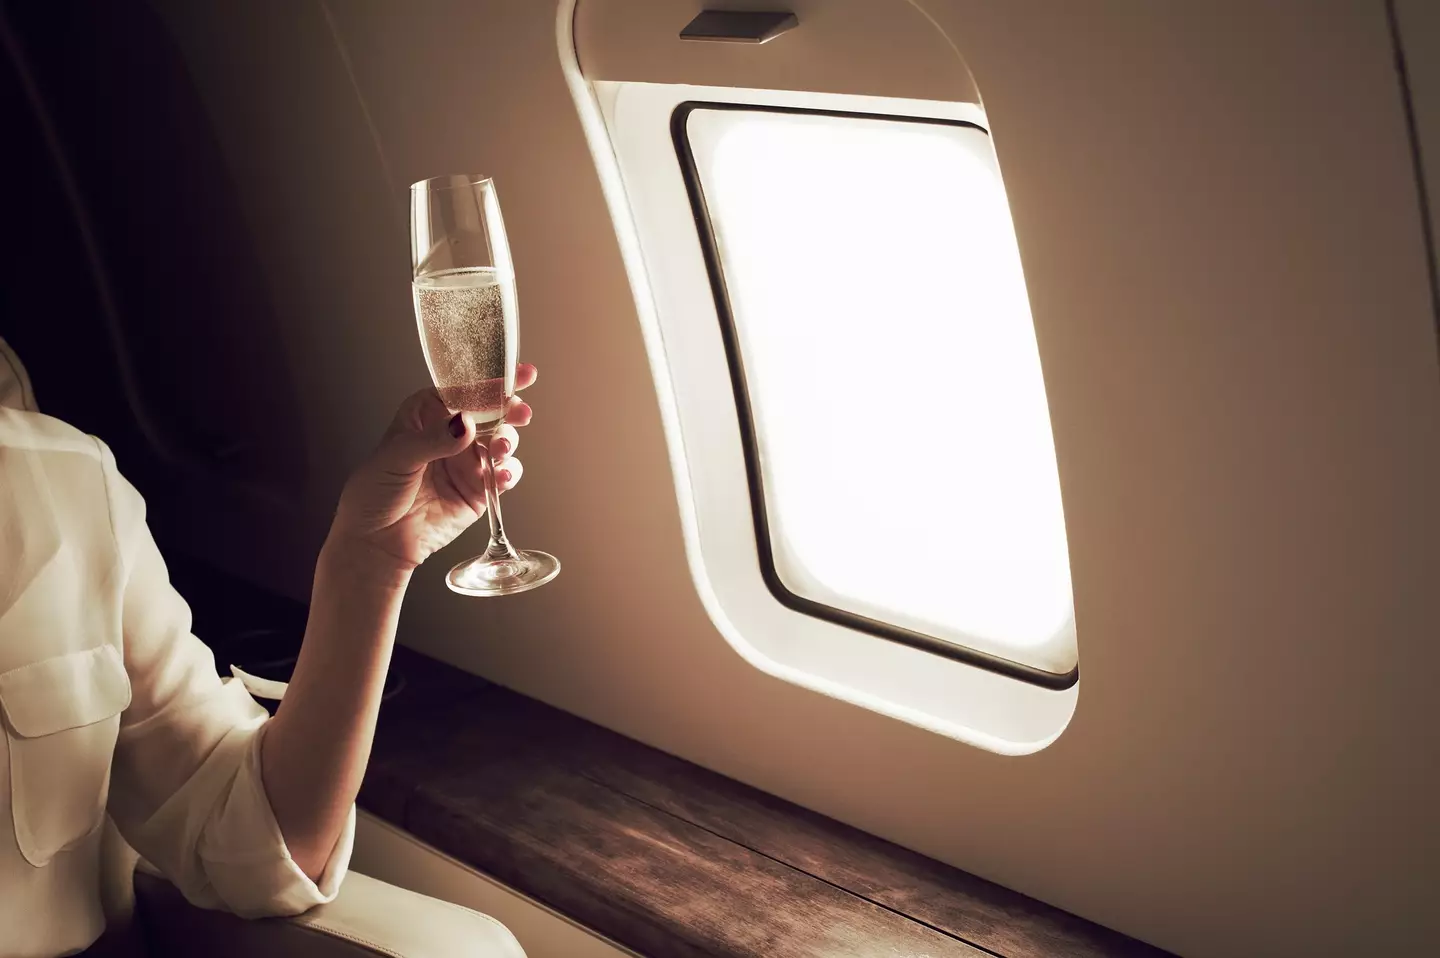 The expert says alcohol while flying is 'the biggest sin of travel'.